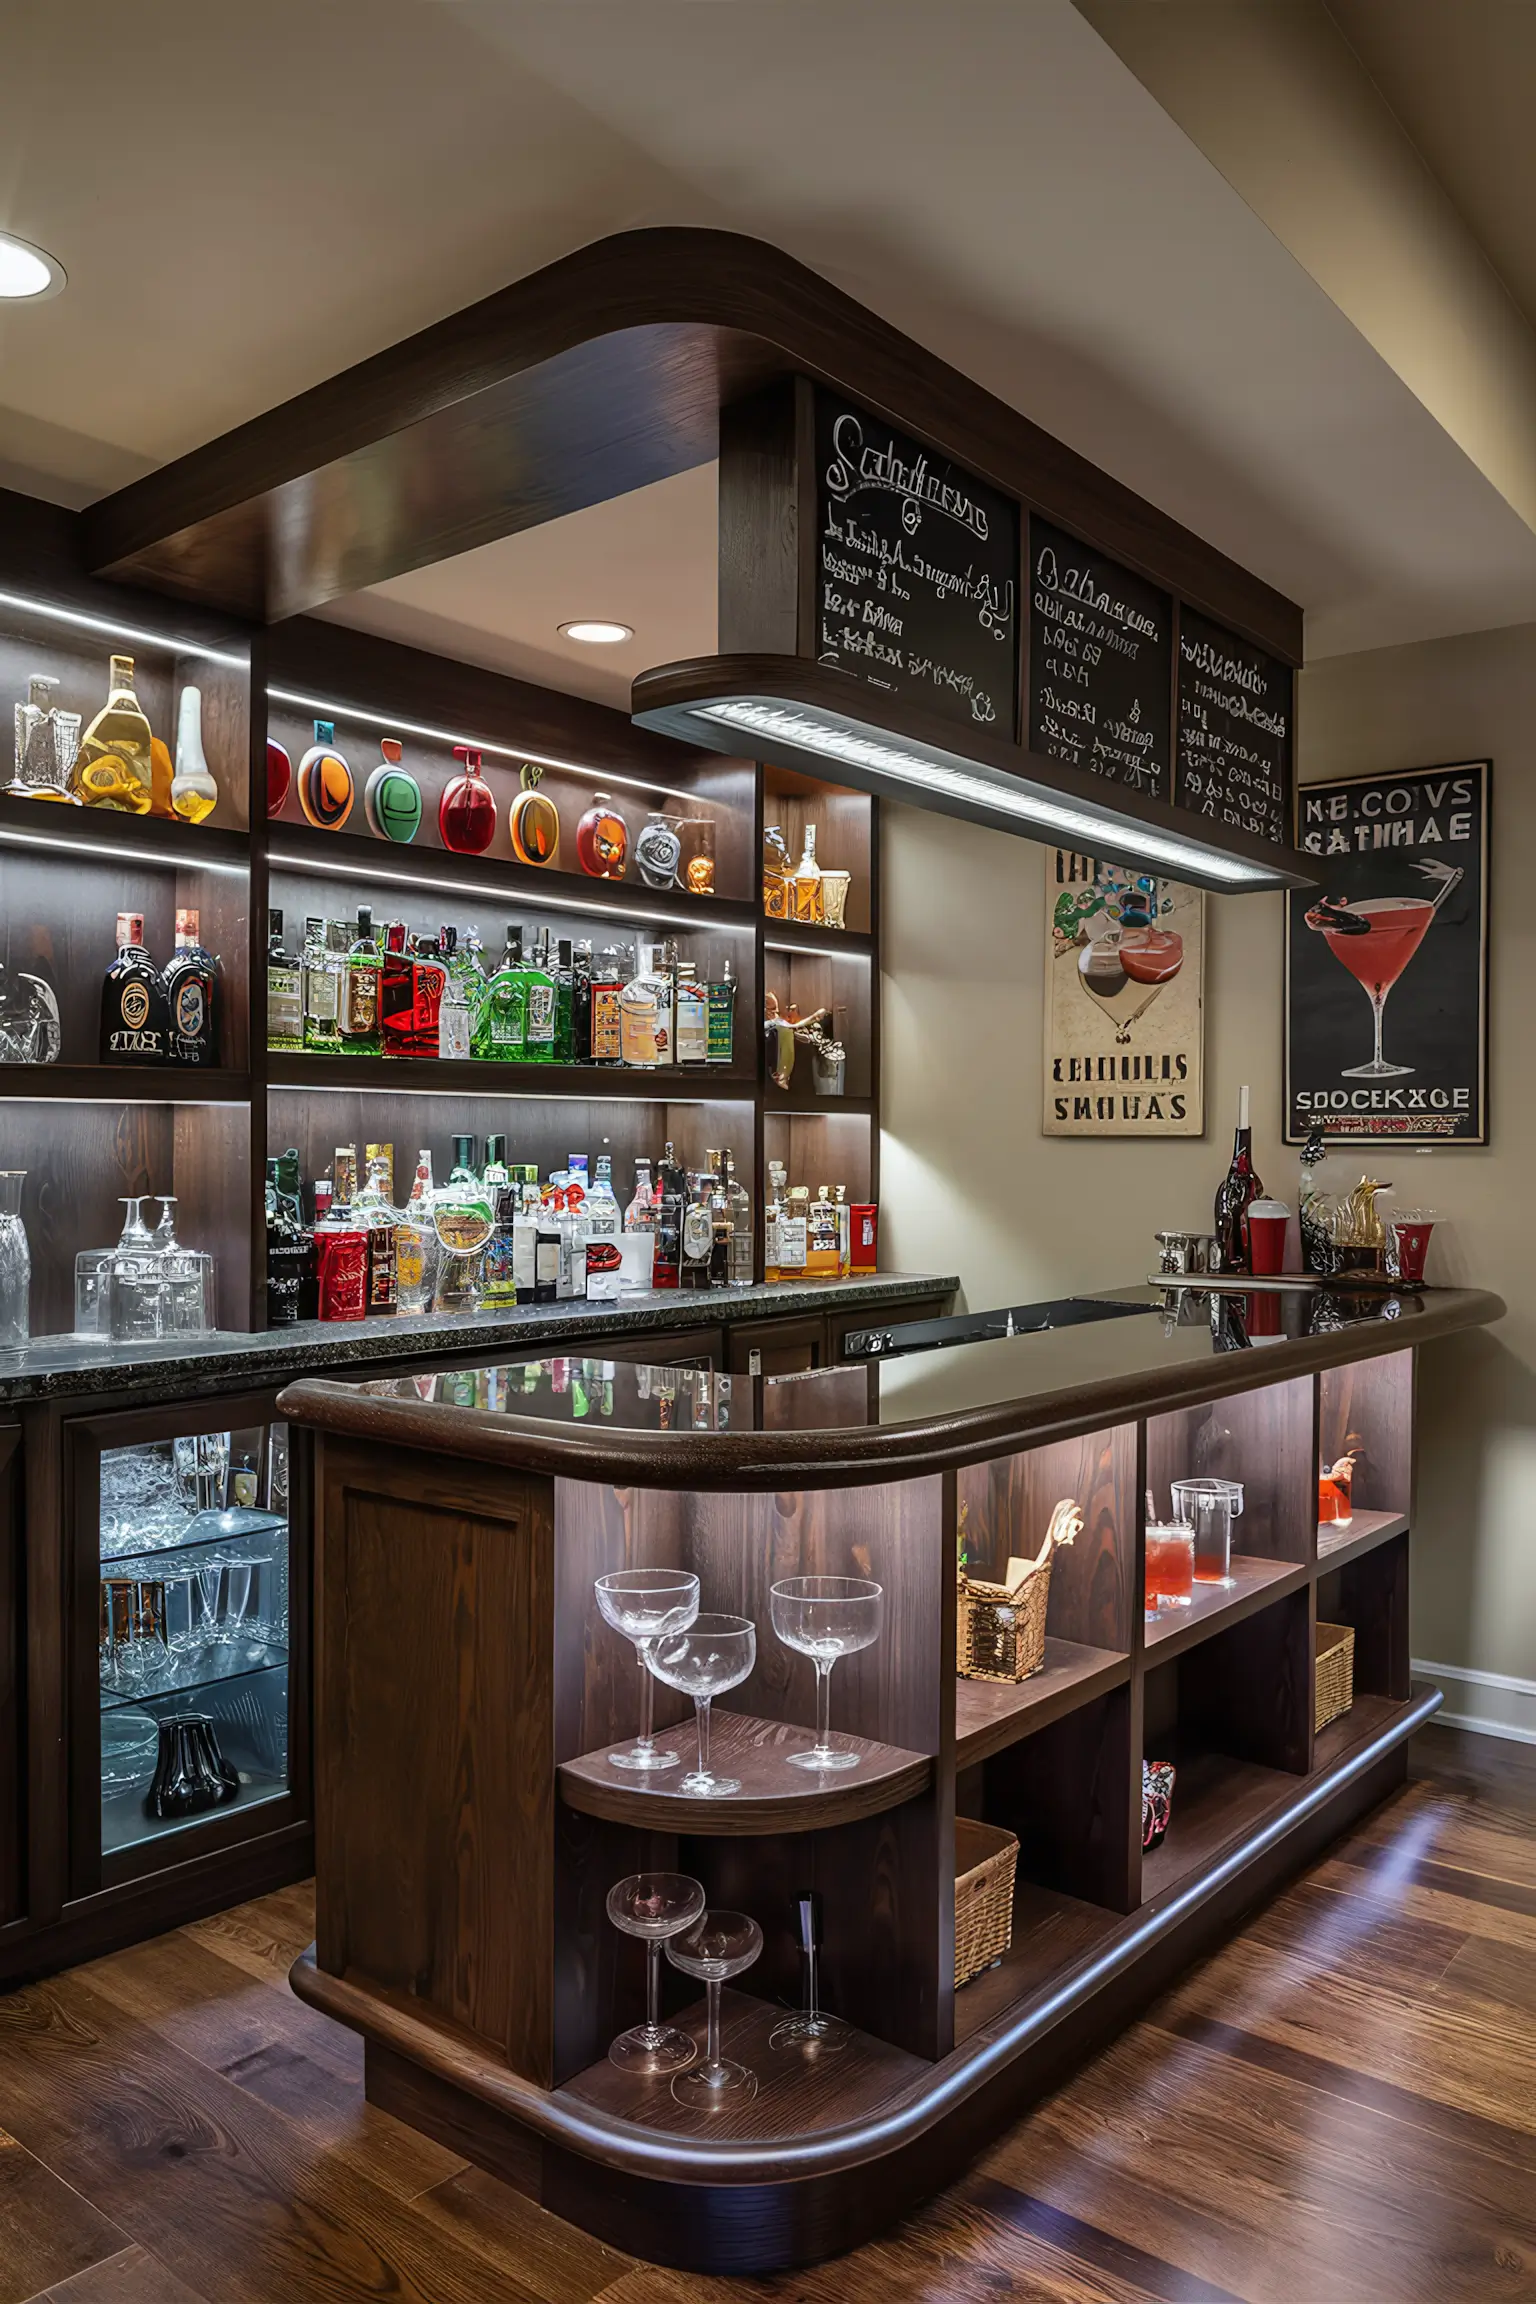 Basement bar with clever storage solutions and organized shelving.